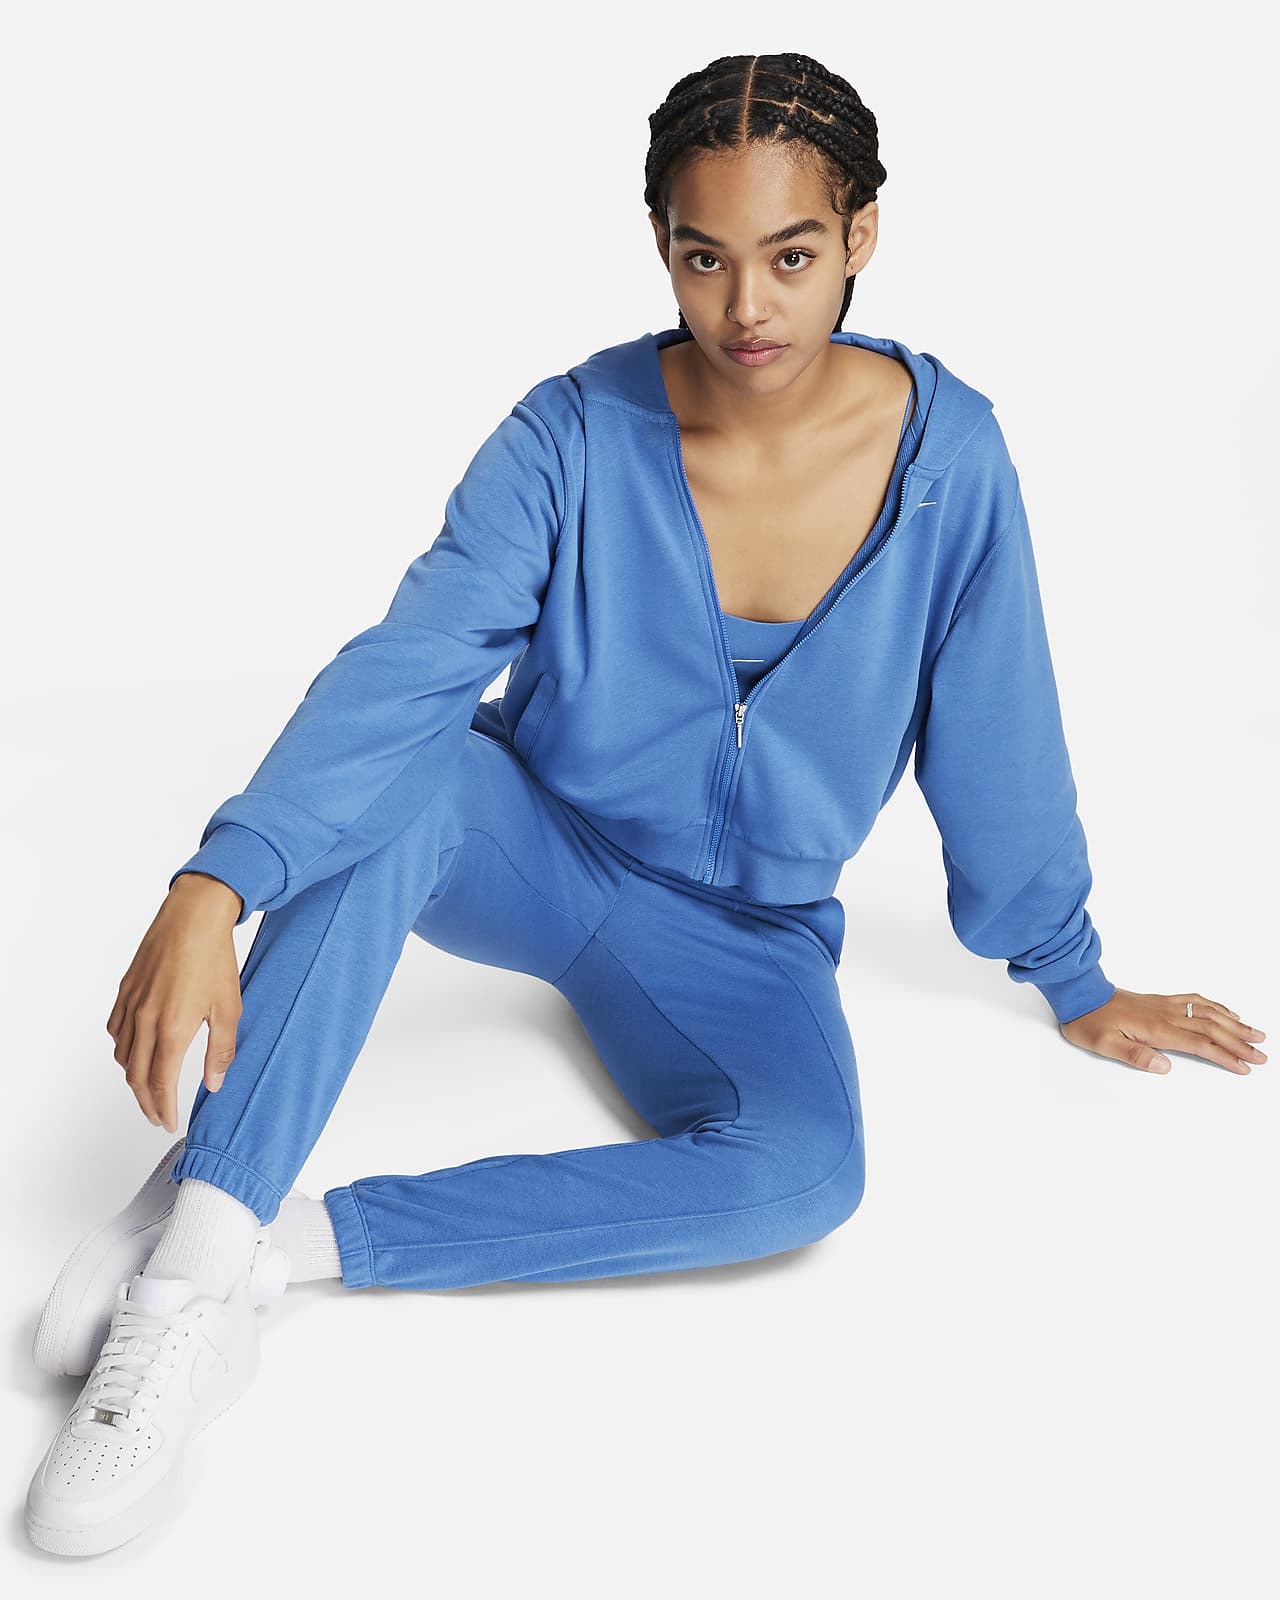 Nike Sportswear Chill Terry Women's High-Waisted Slim 2 French Terry Shorts.